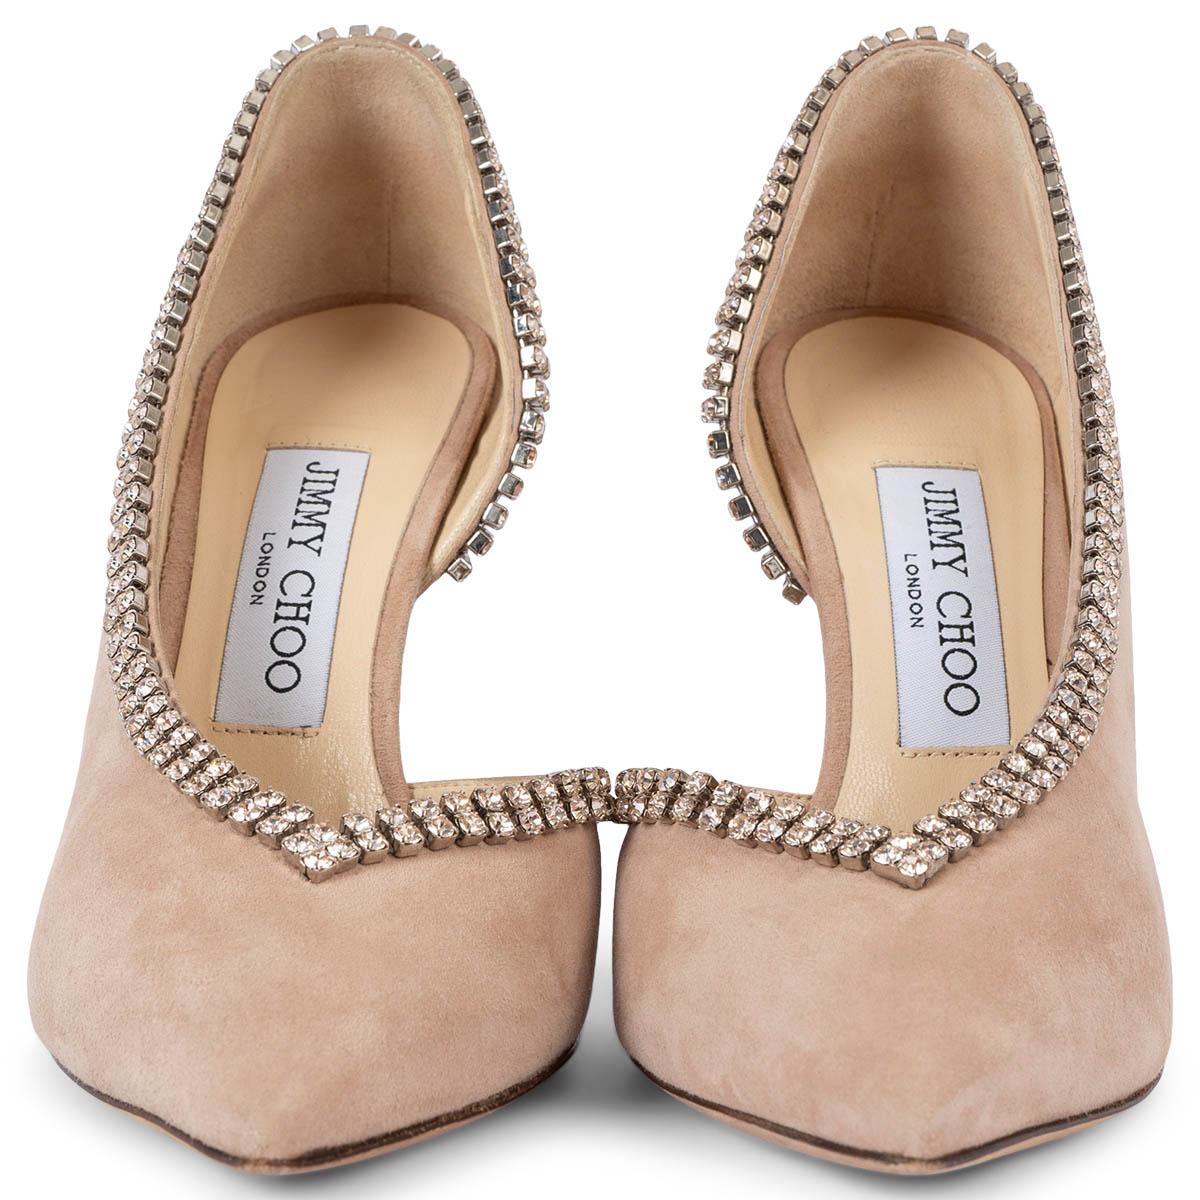 100% authentic Jimmy Choo Lilian100 pointed-toe pumps in blush suede embellished with opulent crystal trim. Have been worn once or twice and are in excellent condition. Come with dust bag. 

Measurements
Imprinted Size	36
Shoe Size	36
Inside